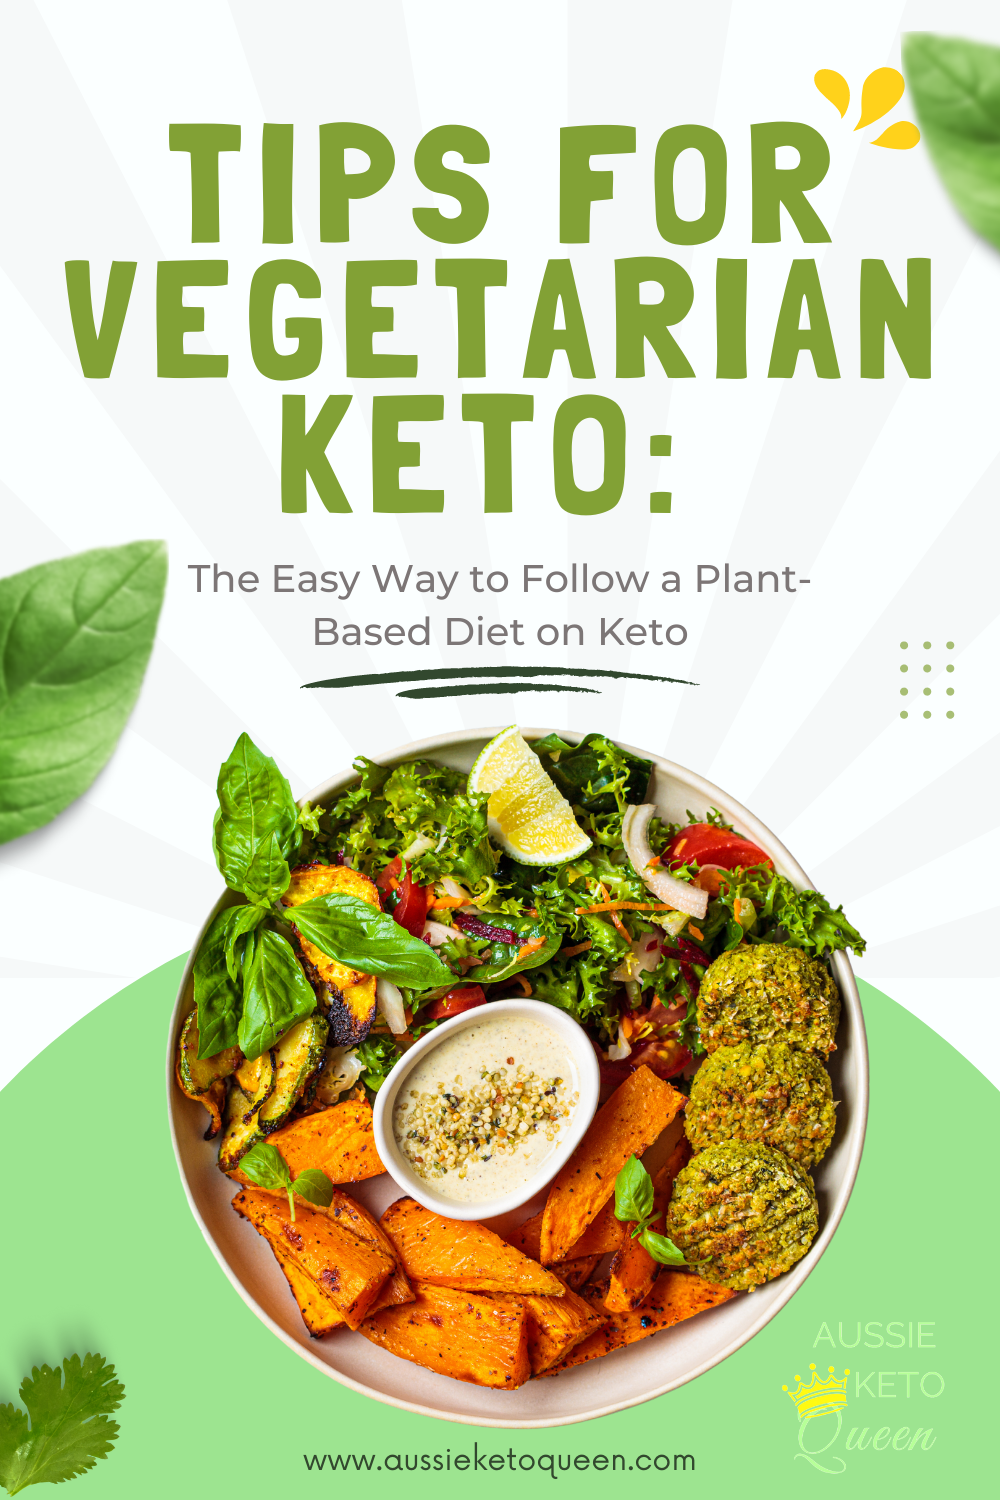 Tips for Vegetarian Keto The Easy Way to Follow a Plant-Based Diet on Keto - Featured Image